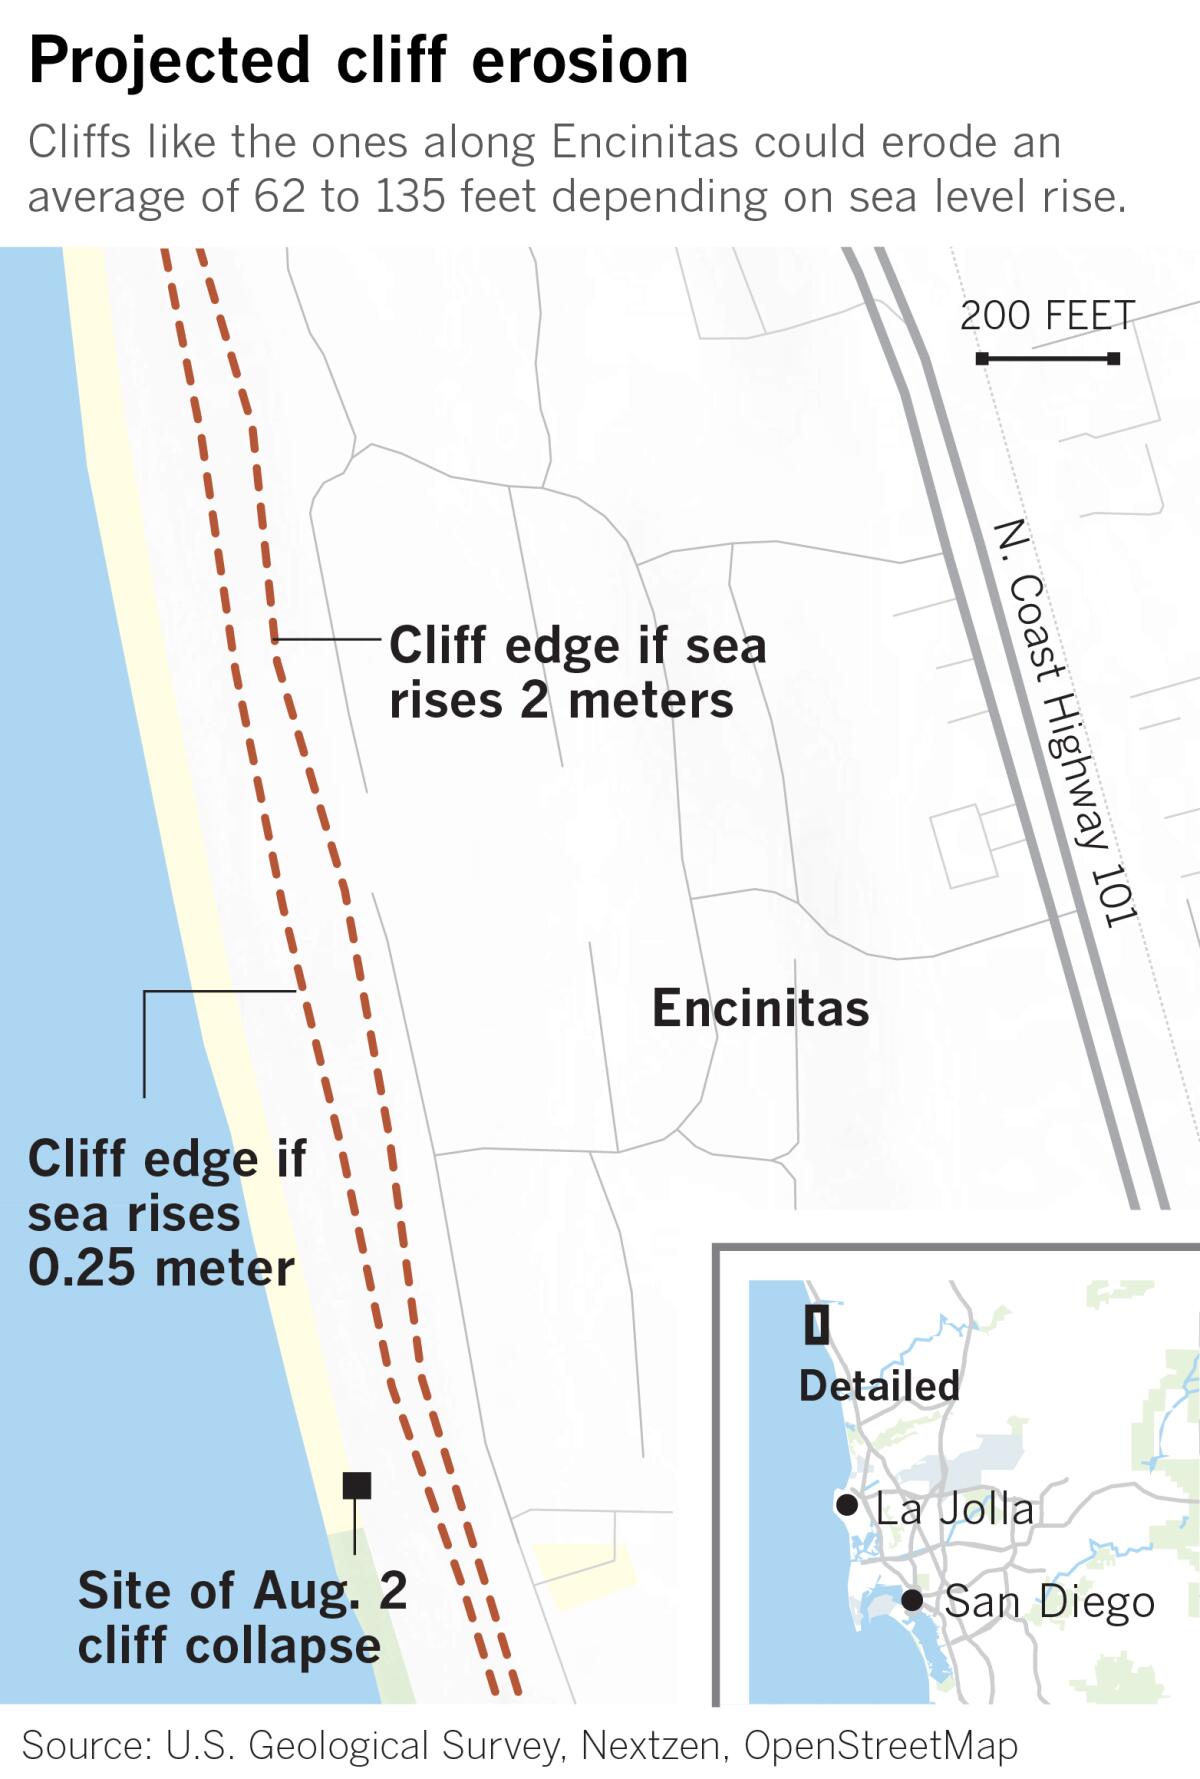 A map of projected cliff erosion